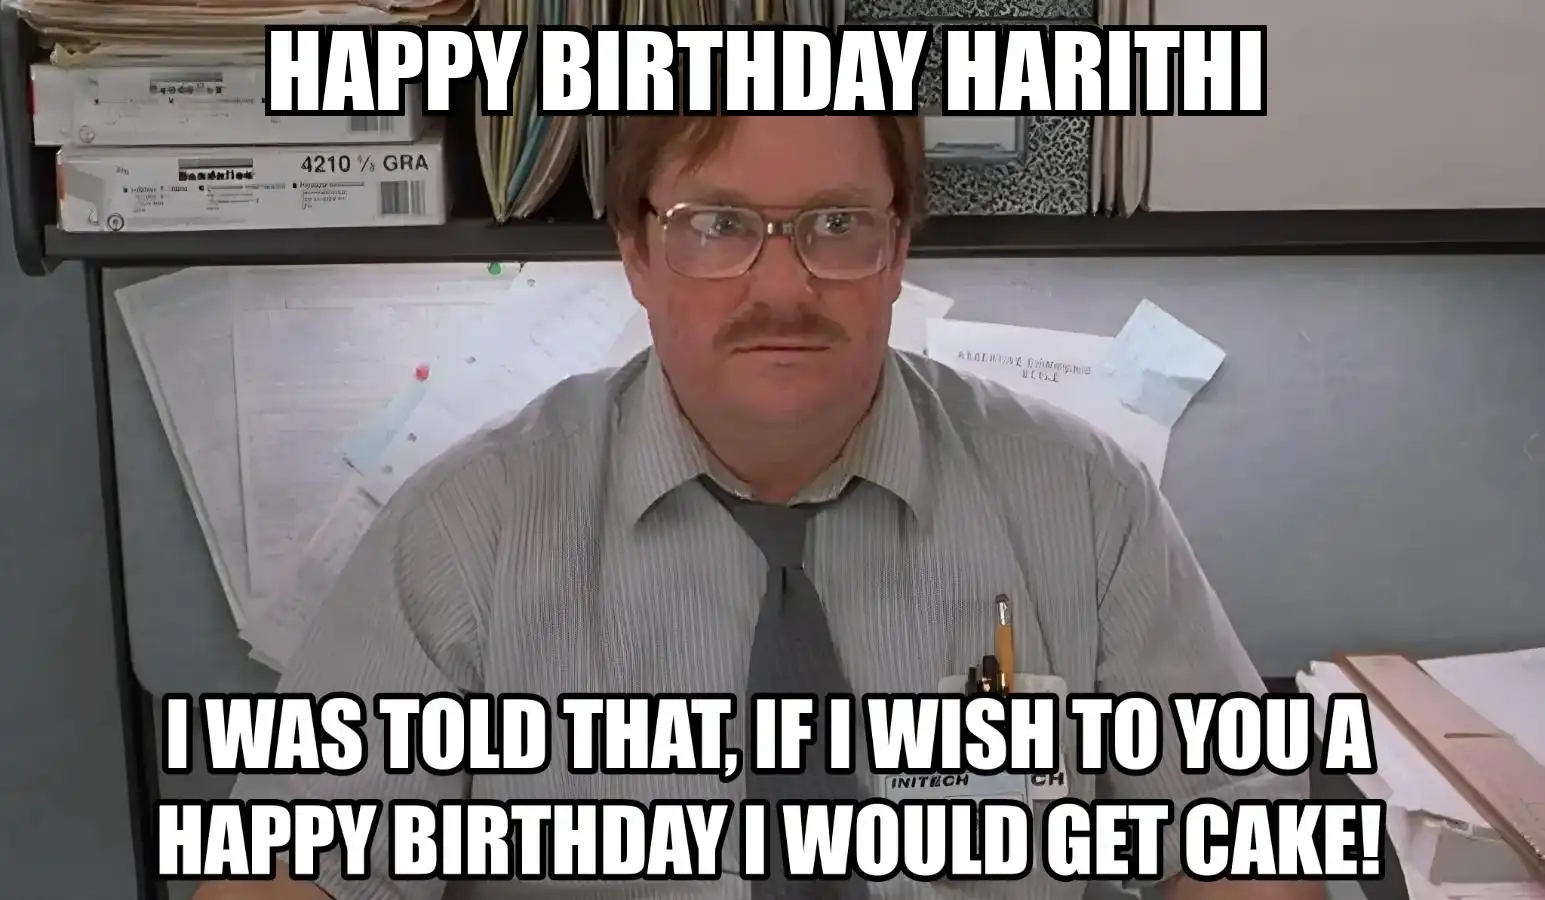 Happy Birthday Harithi I Would Get A Cake Meme